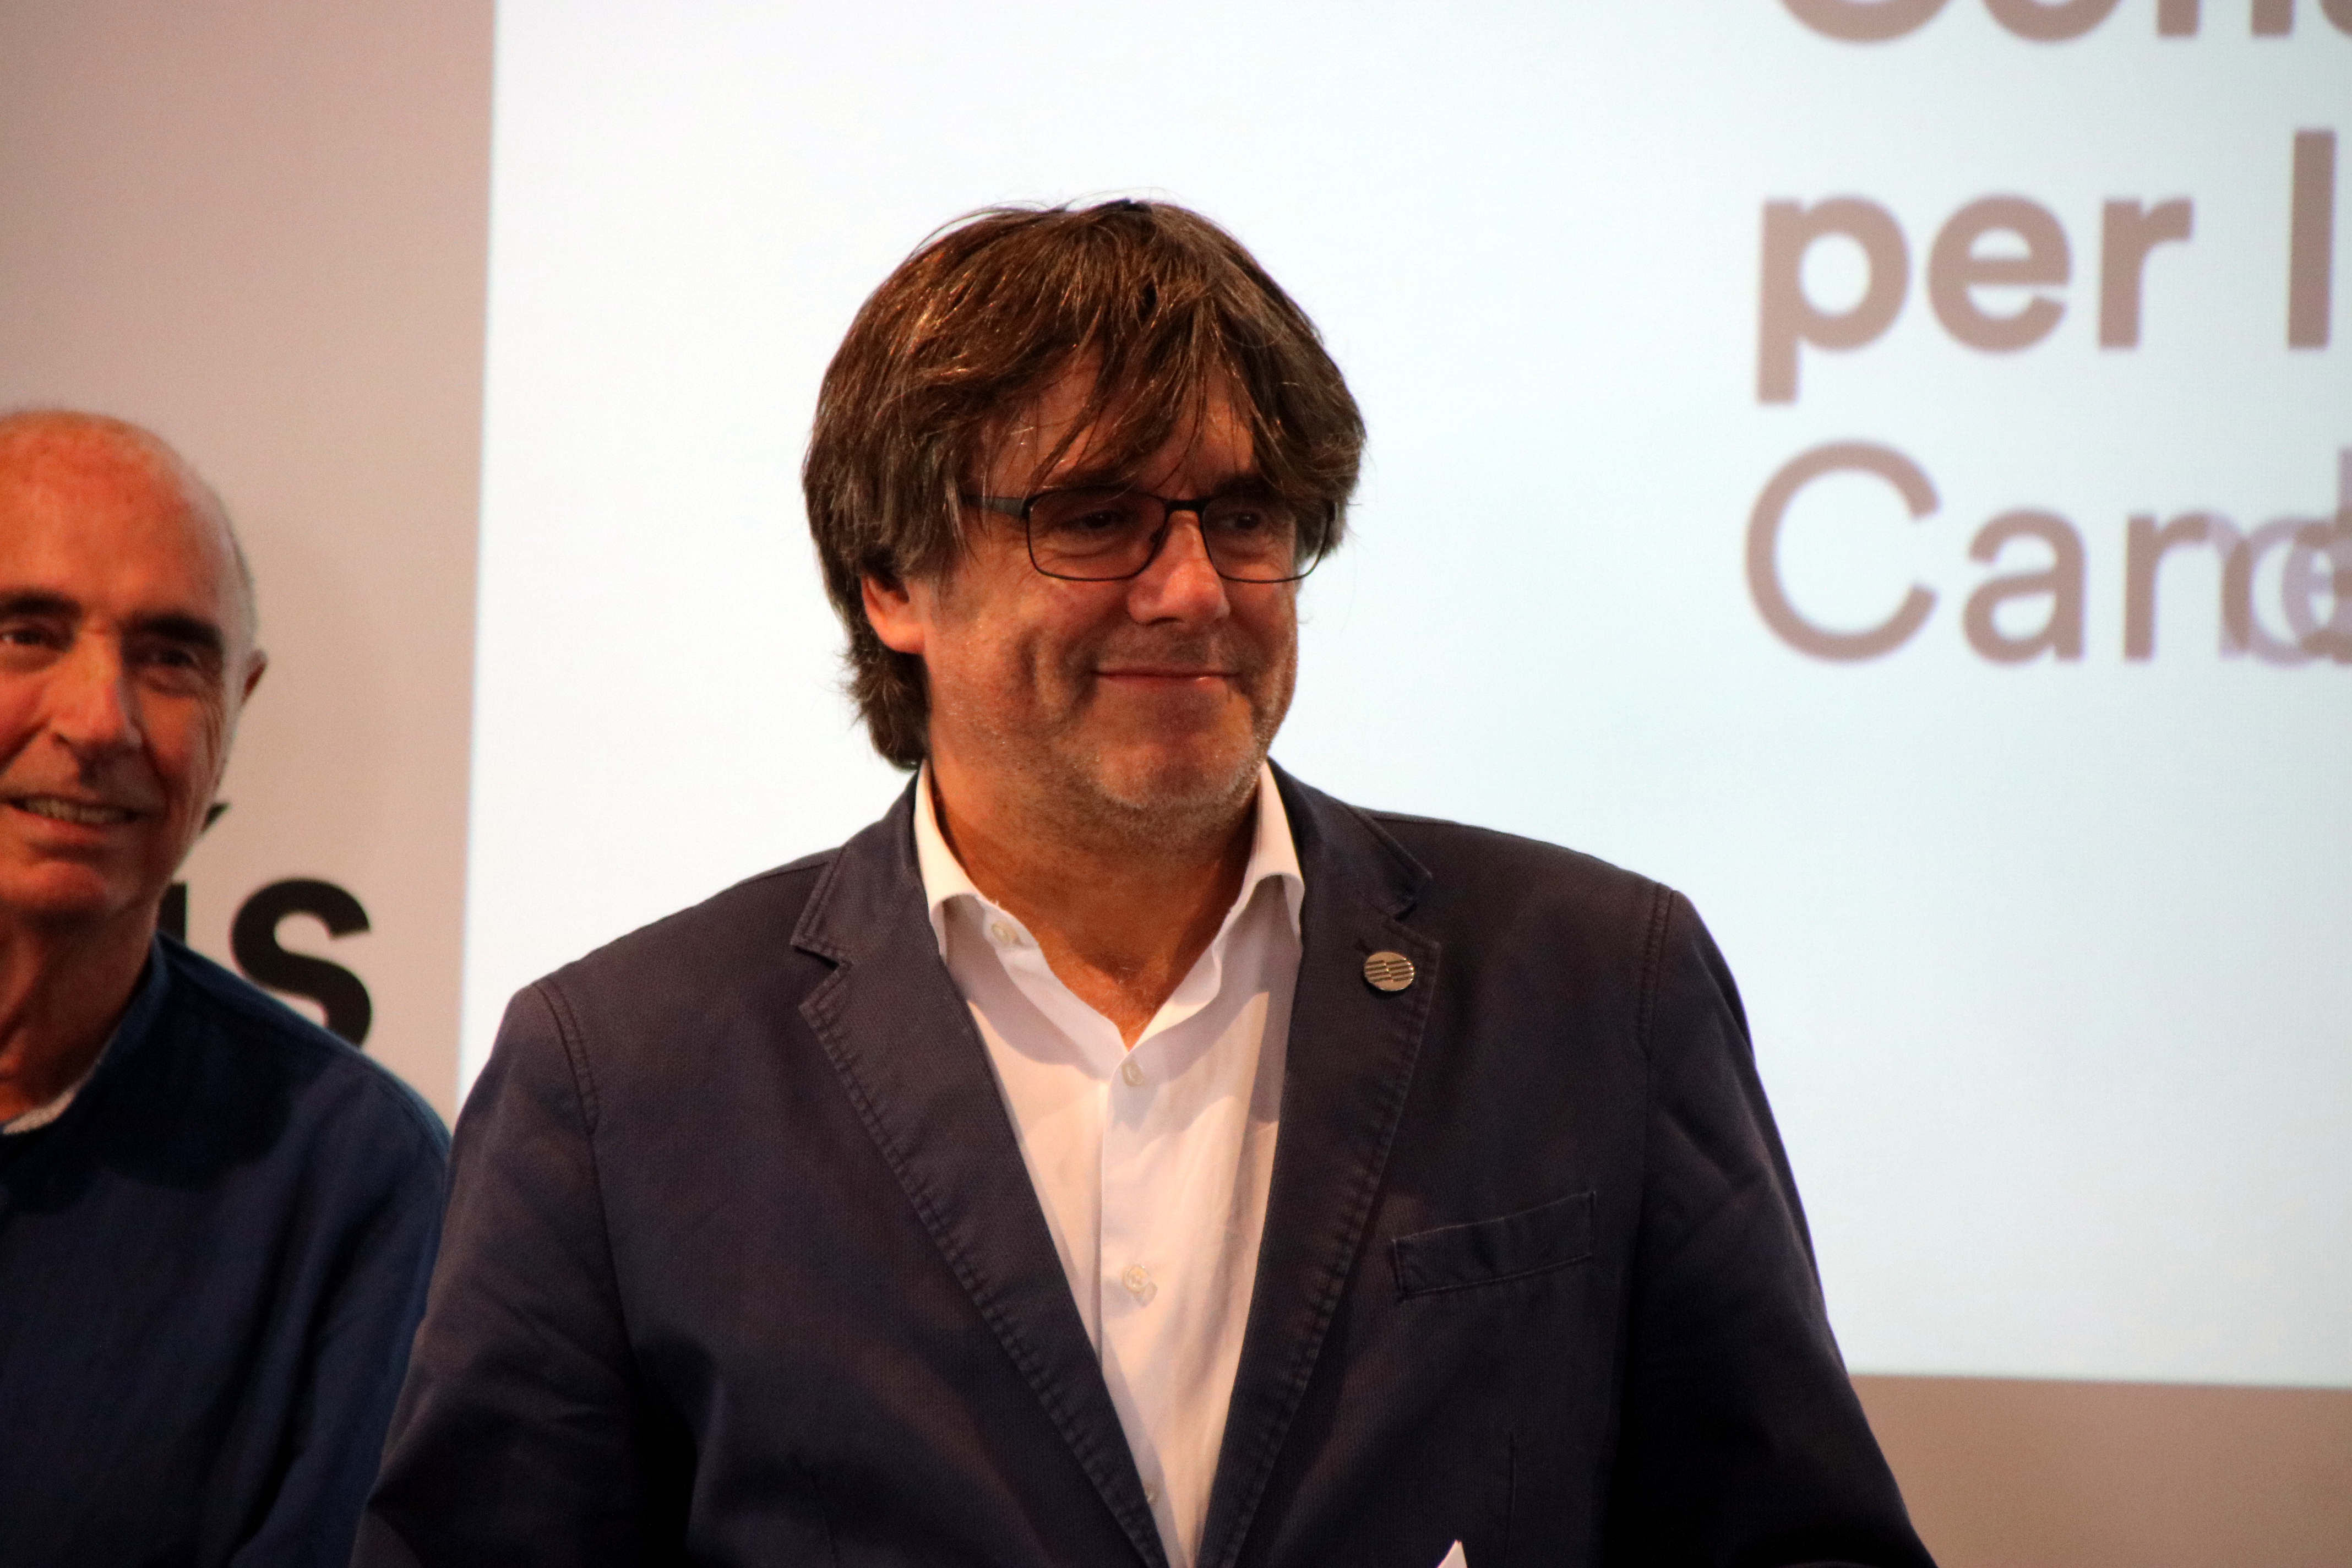 Former Catalan president Carles Puigdemont during a Consell per la República association event on September 17, 2022